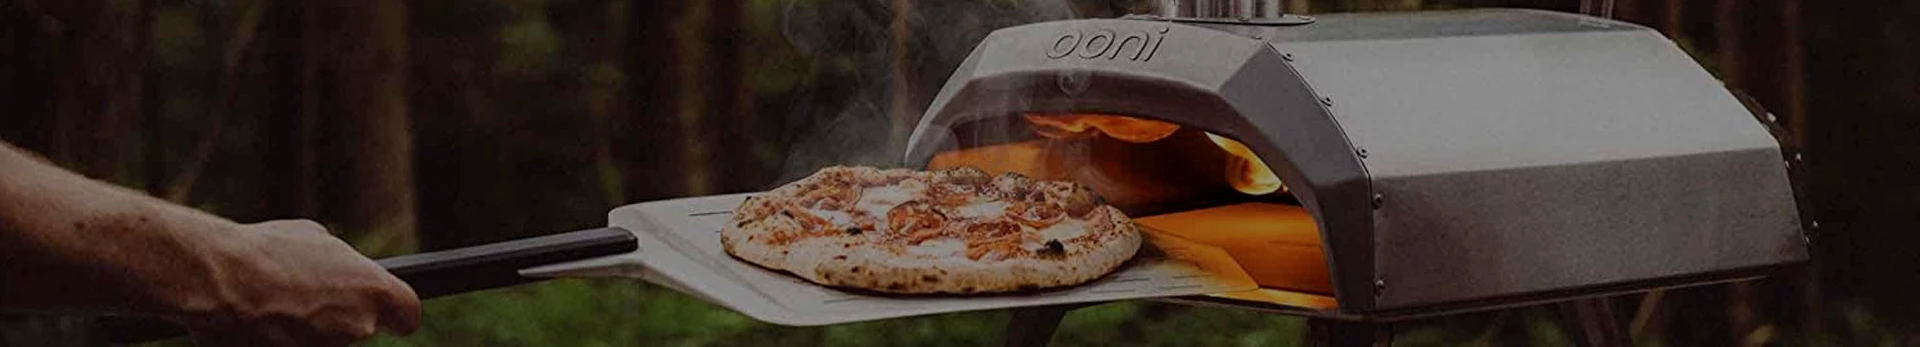 Ooni pizzaovens